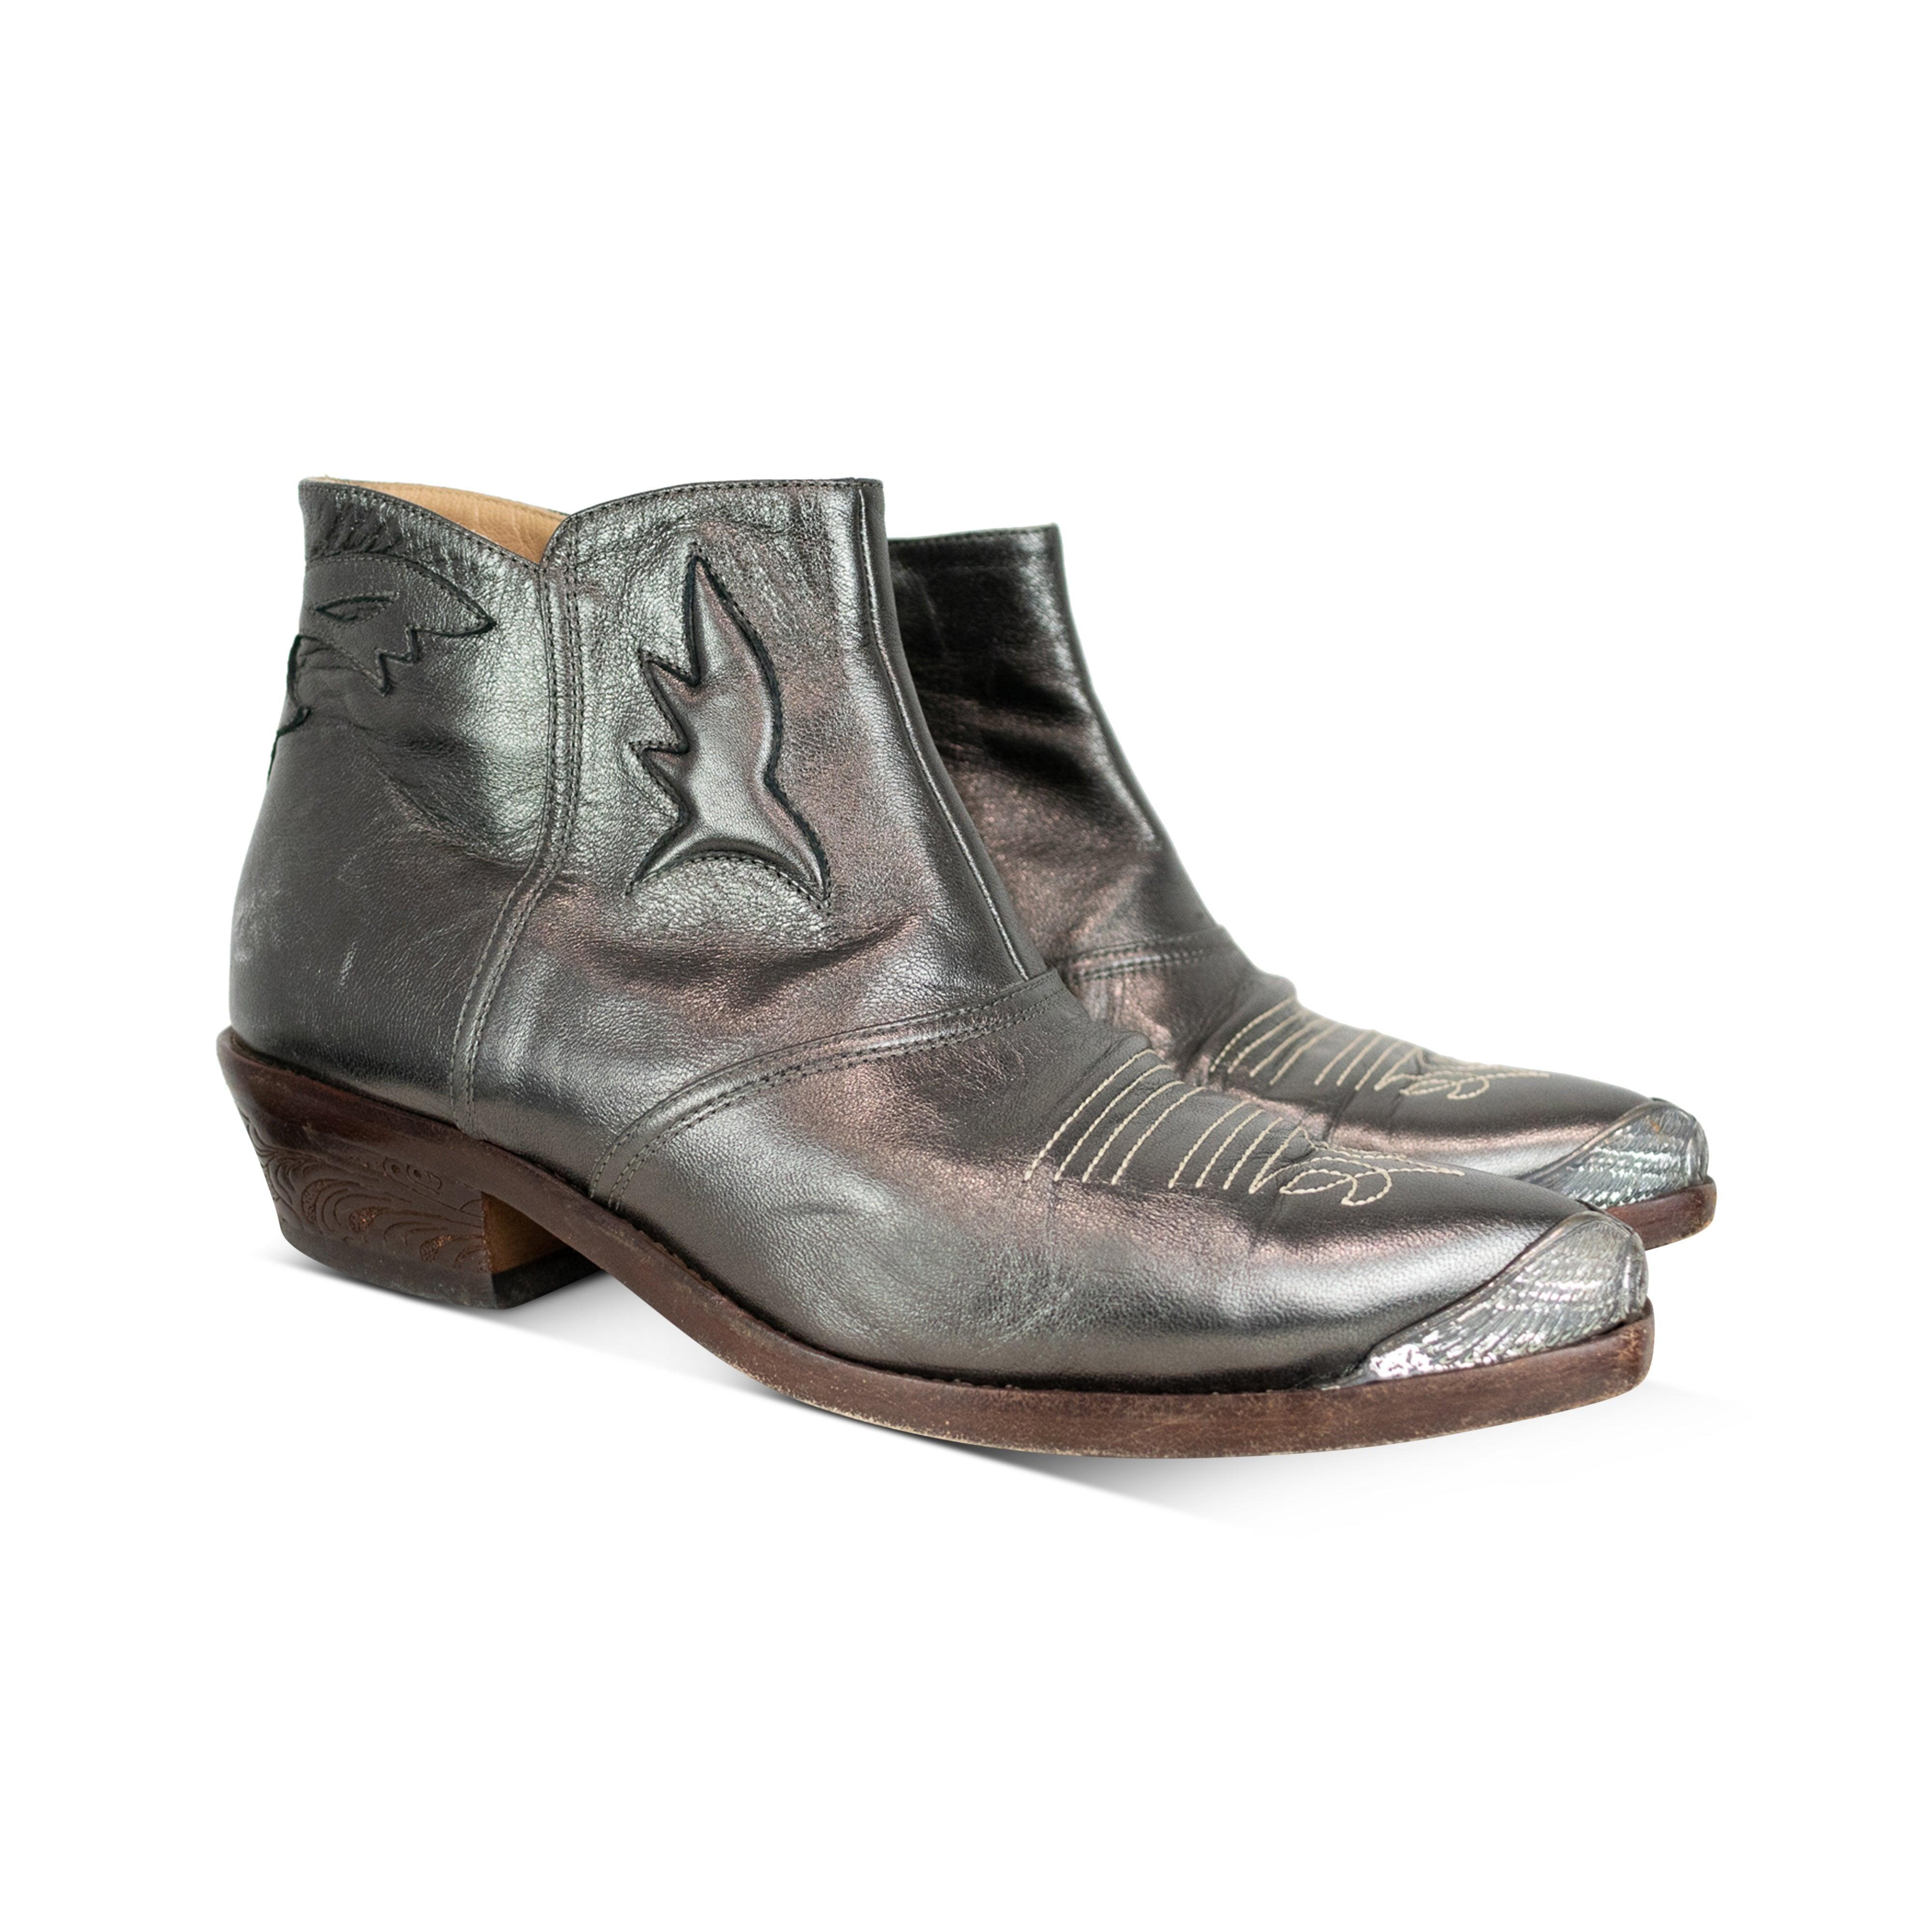 Golden Goose 'Thelma' Boots - Women's 39 - Fashionably Yours